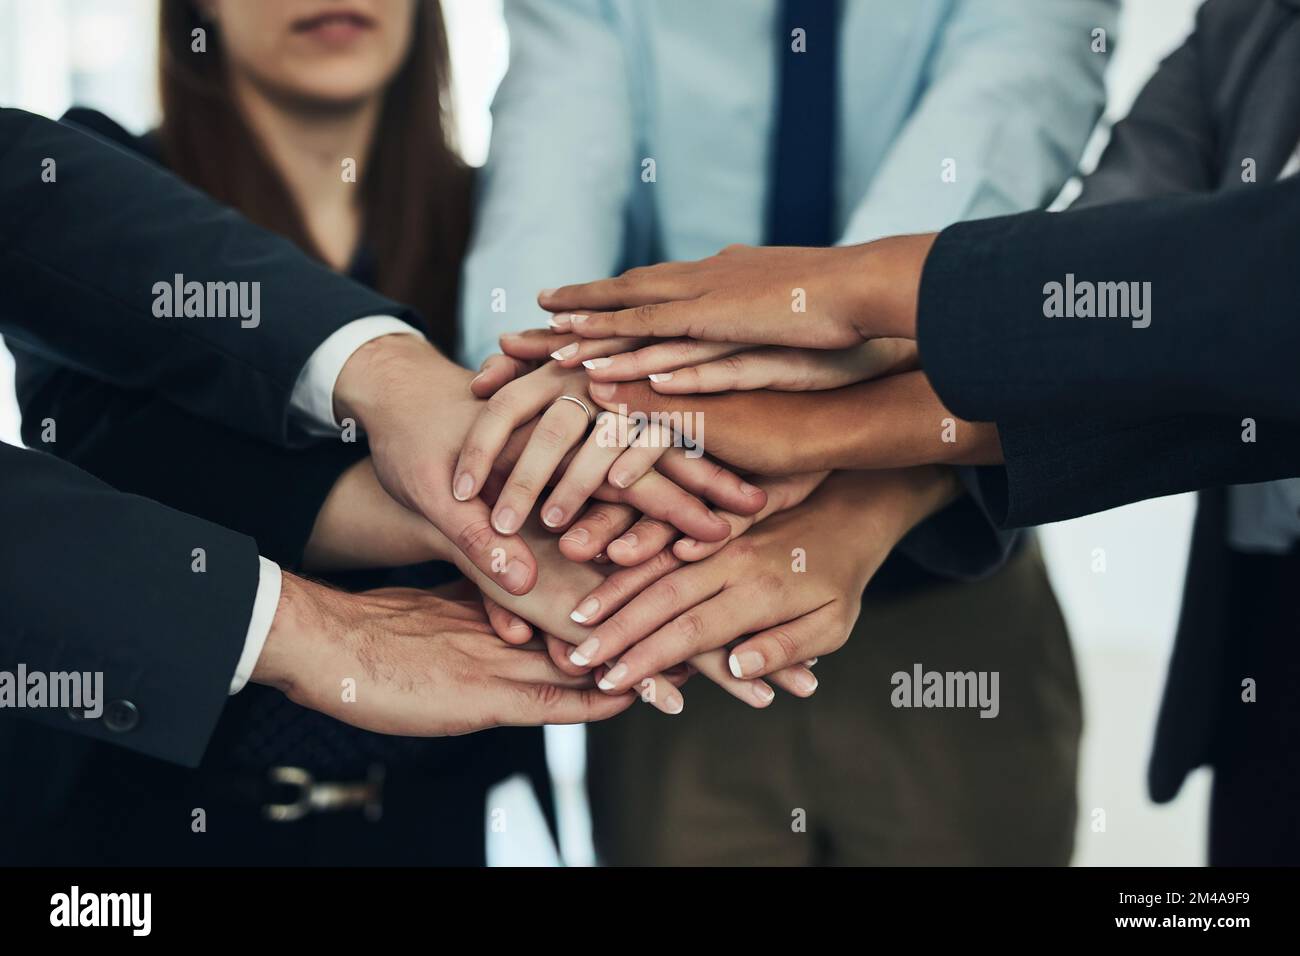 It takes a team to win in business. a group of businesspeople joining their hands in solidarity. Stock Photo